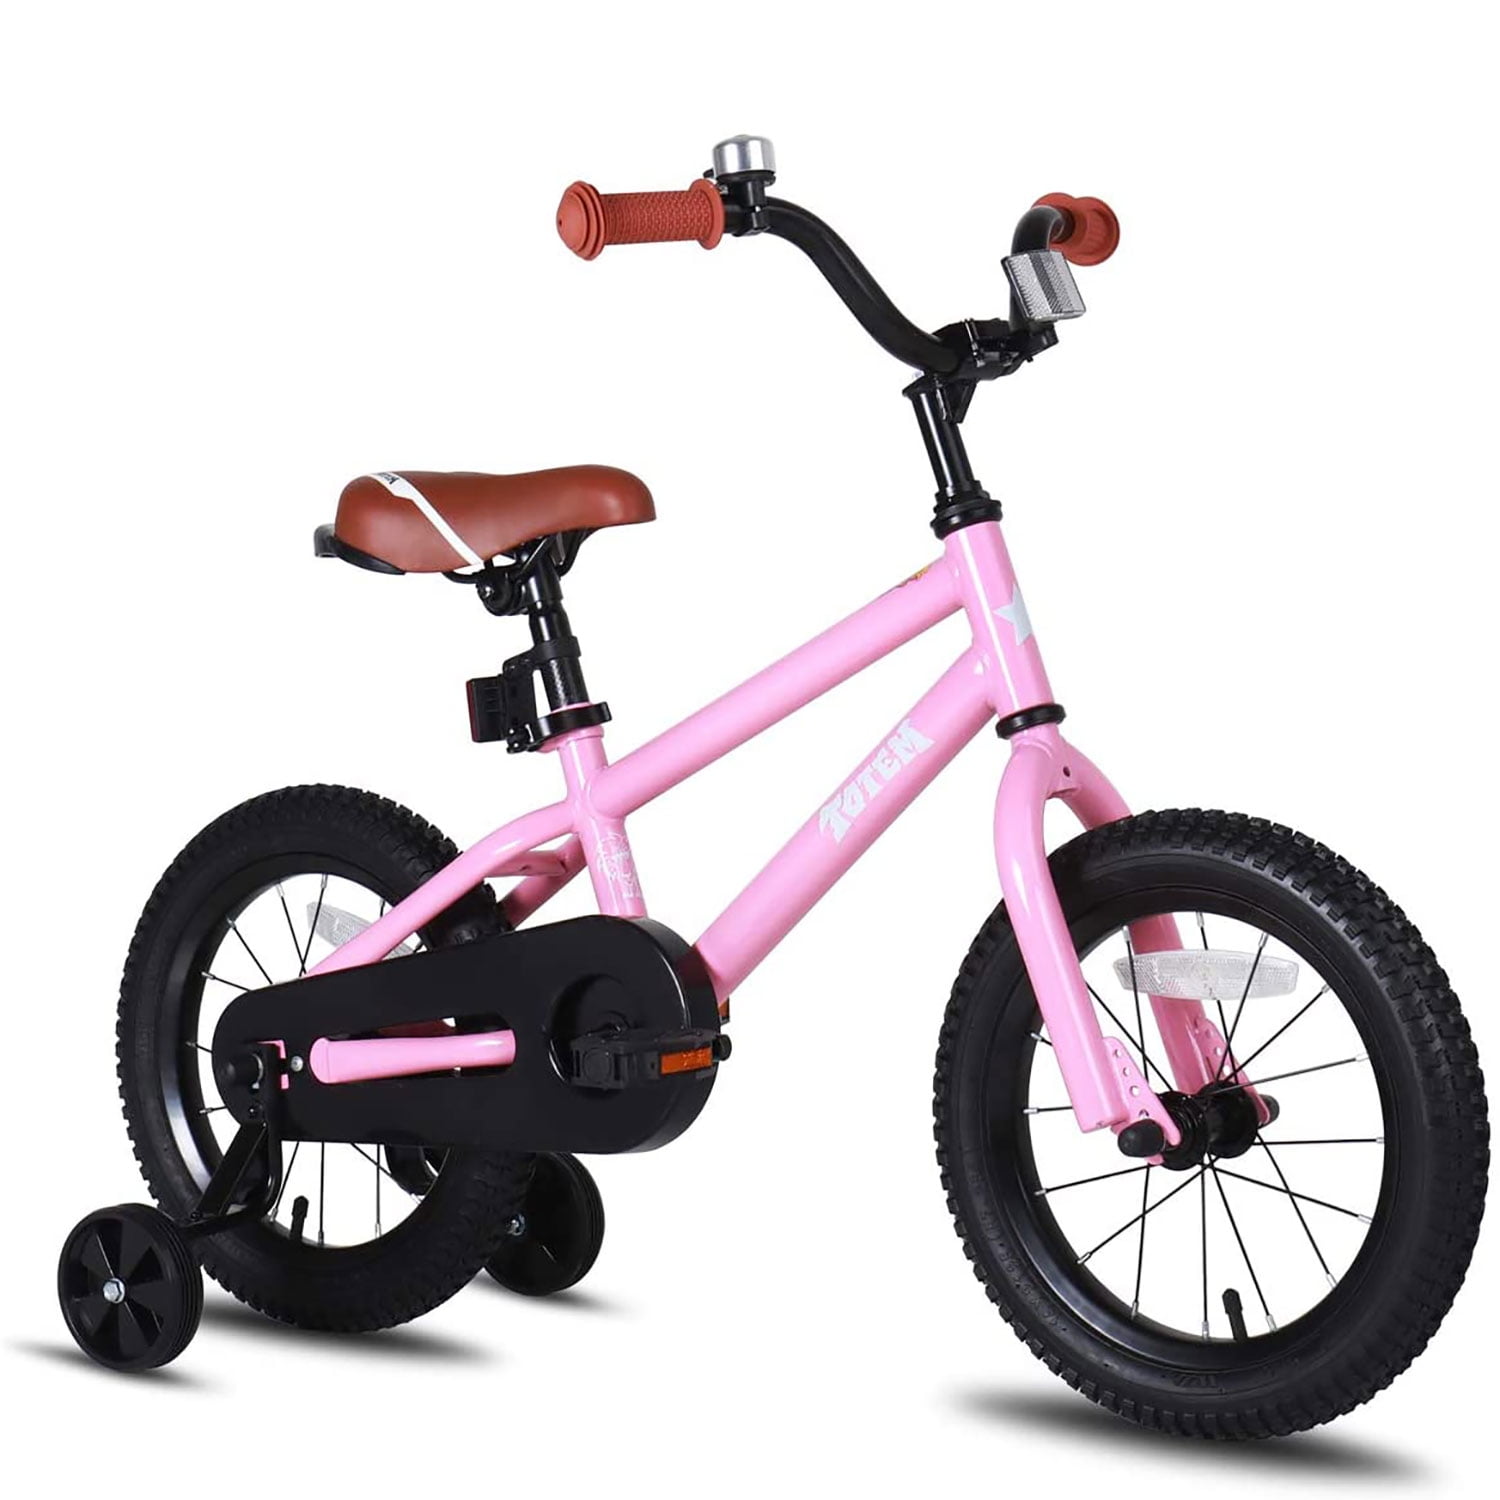 Details about   12" Boy's or Girl's BMX Bicycle S-Type Frame EVA Tire No Brake Kid's Bike 3 Year 